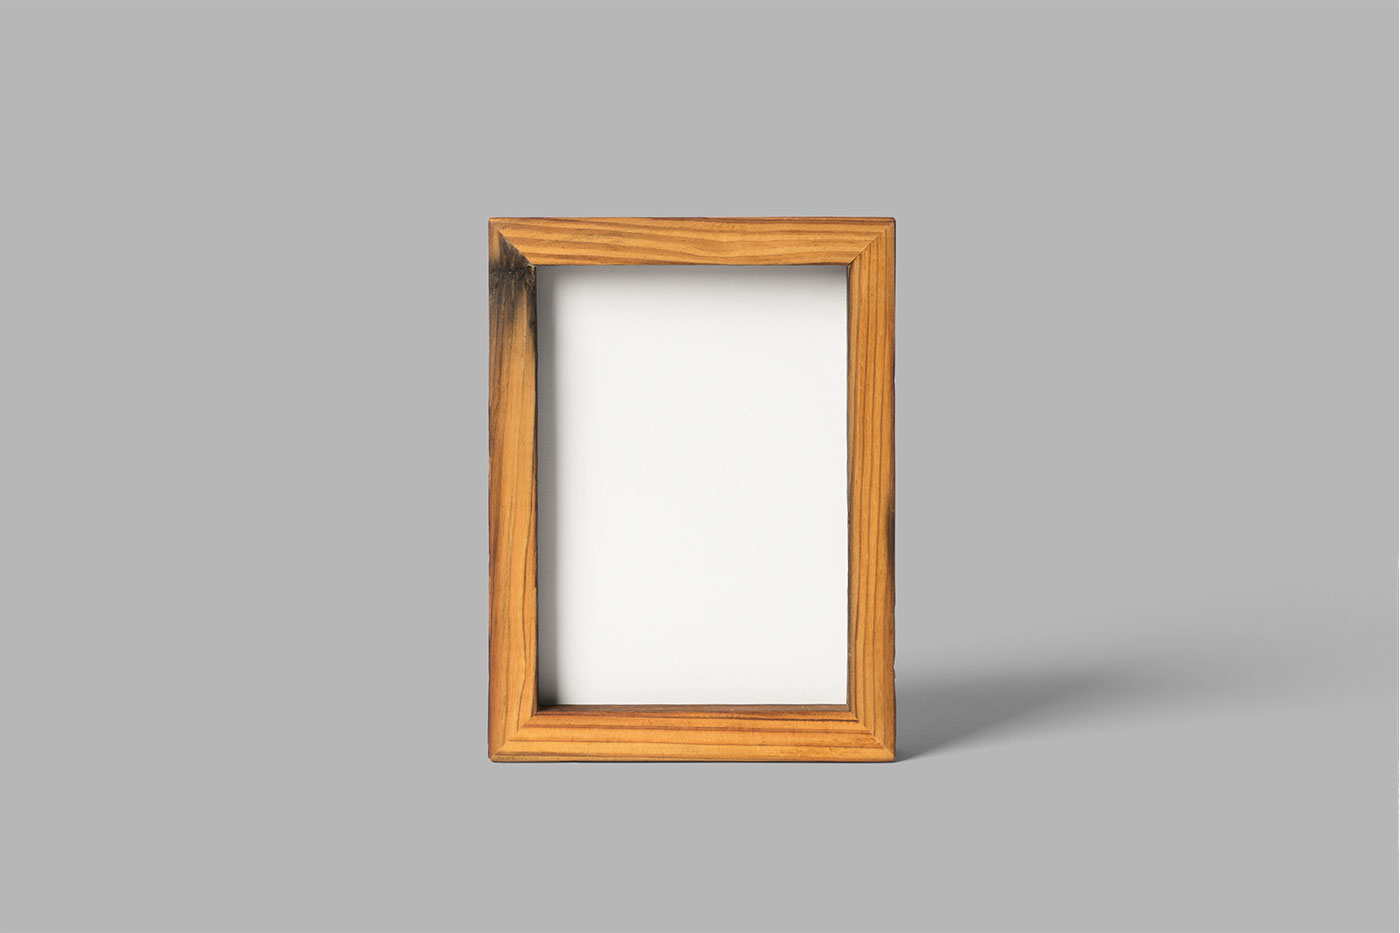 Minimalistic Wood Frame Mockup in a Solid Background FREE PSD